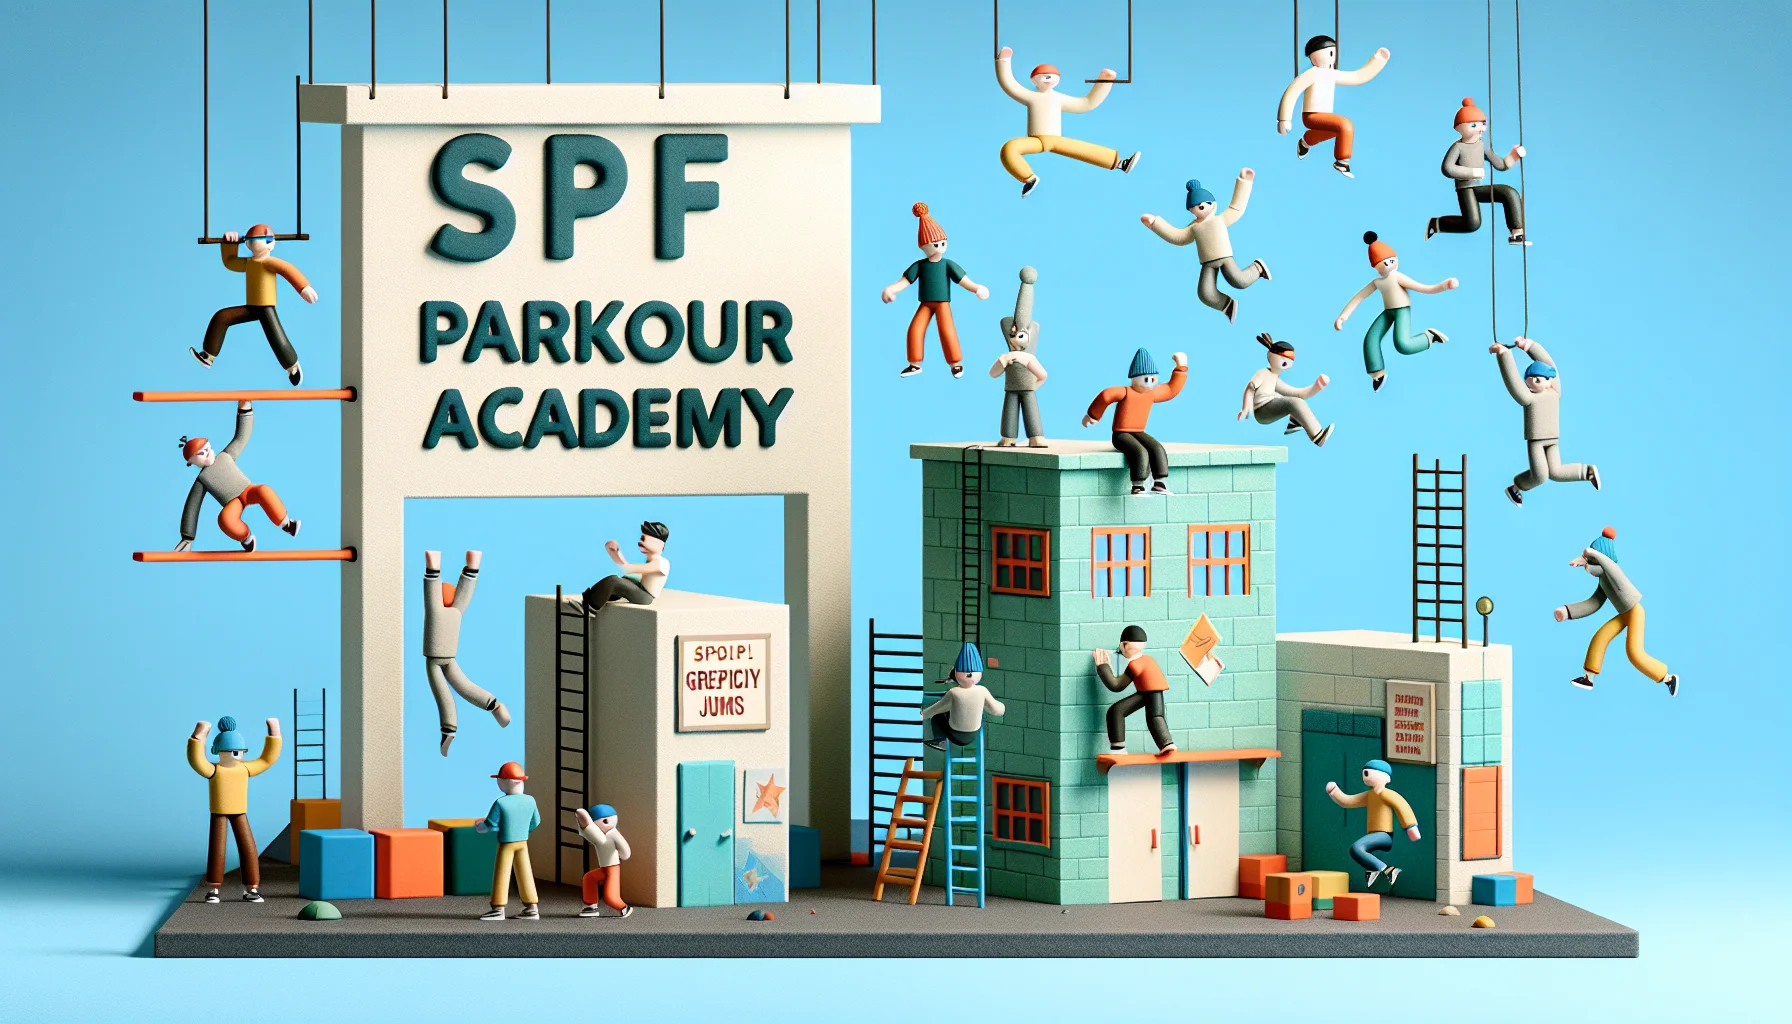 Create an image of the SPF Parkour Academy in an amusing setting. The scene features a playful representation of parkour training, communicated in a lighthearted manner to inspire individuals to exercise. The academy is depicted as an inviting and stimulating place, filled with a variety of parkour obstacles, alongside students of varying descents and genders, successfully performing different gravity-defying moves. Some are doing vertical wall runs, while others are doing precision jumps but with additional enjoyable twists like wearing novelty hats or making silly faces to add humor and optimism to the scene.